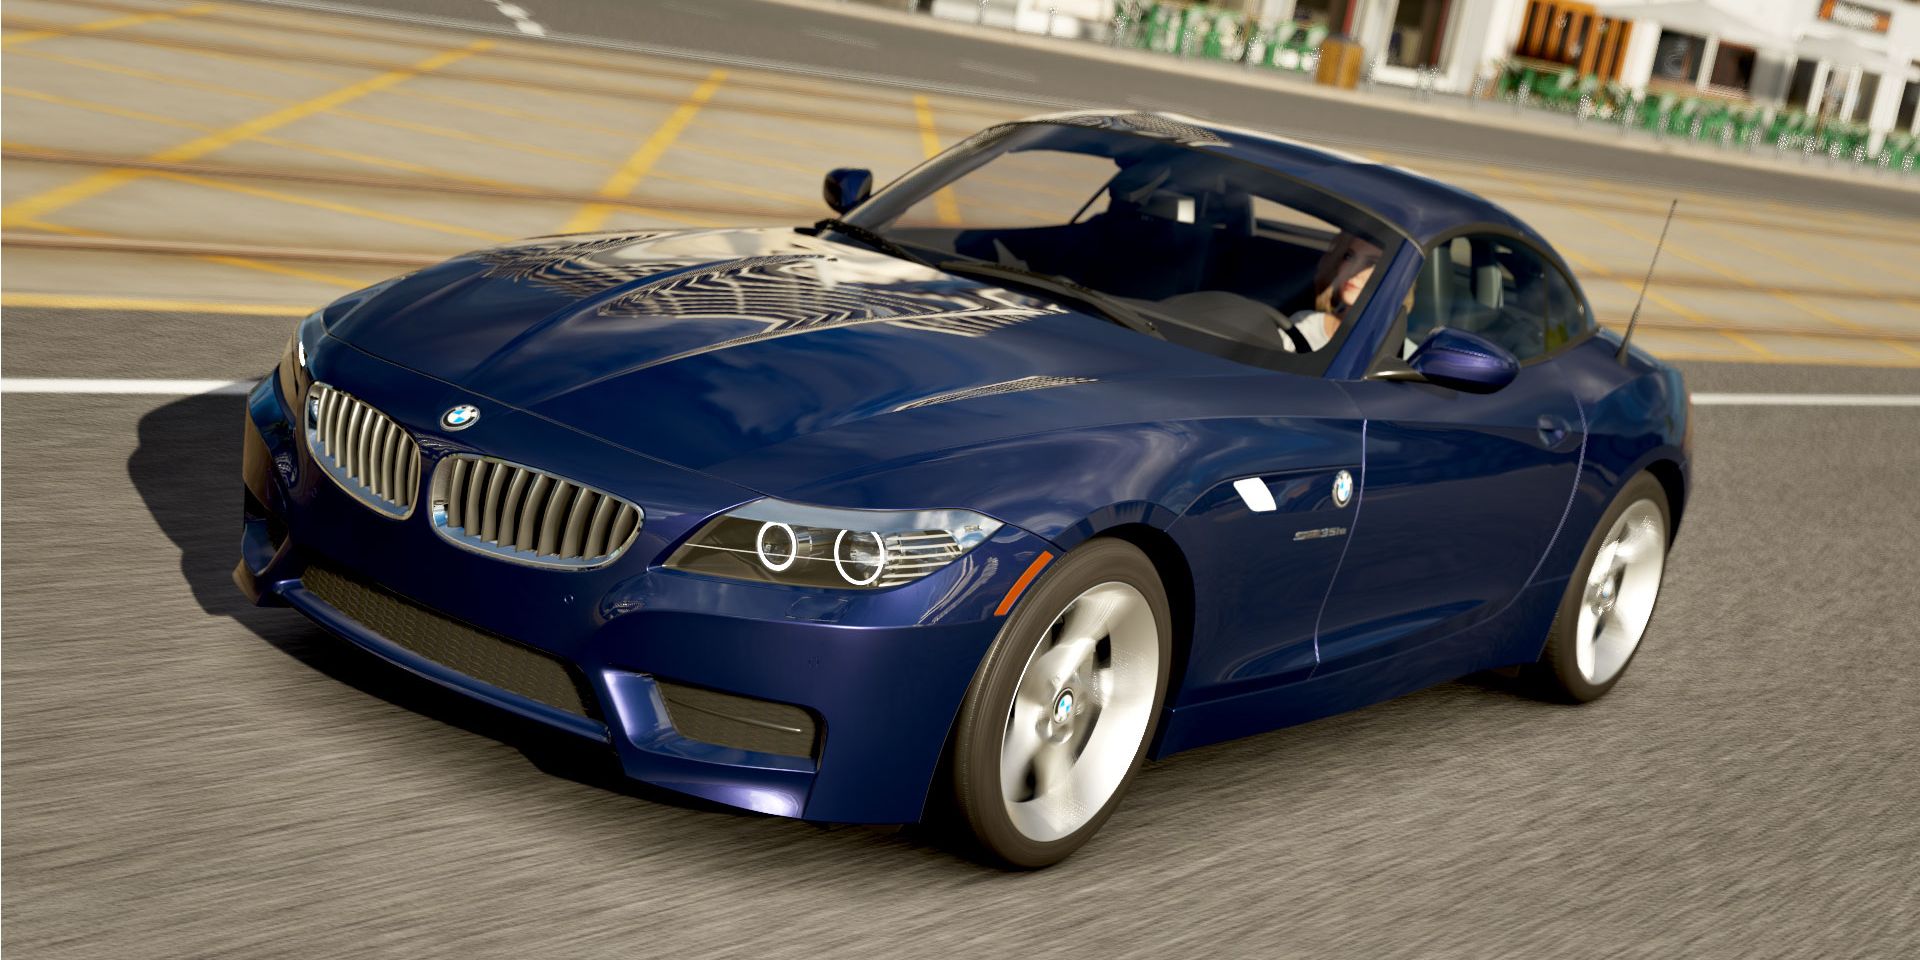 The BMW Z4 sDrive35is in Forza Horizon 4